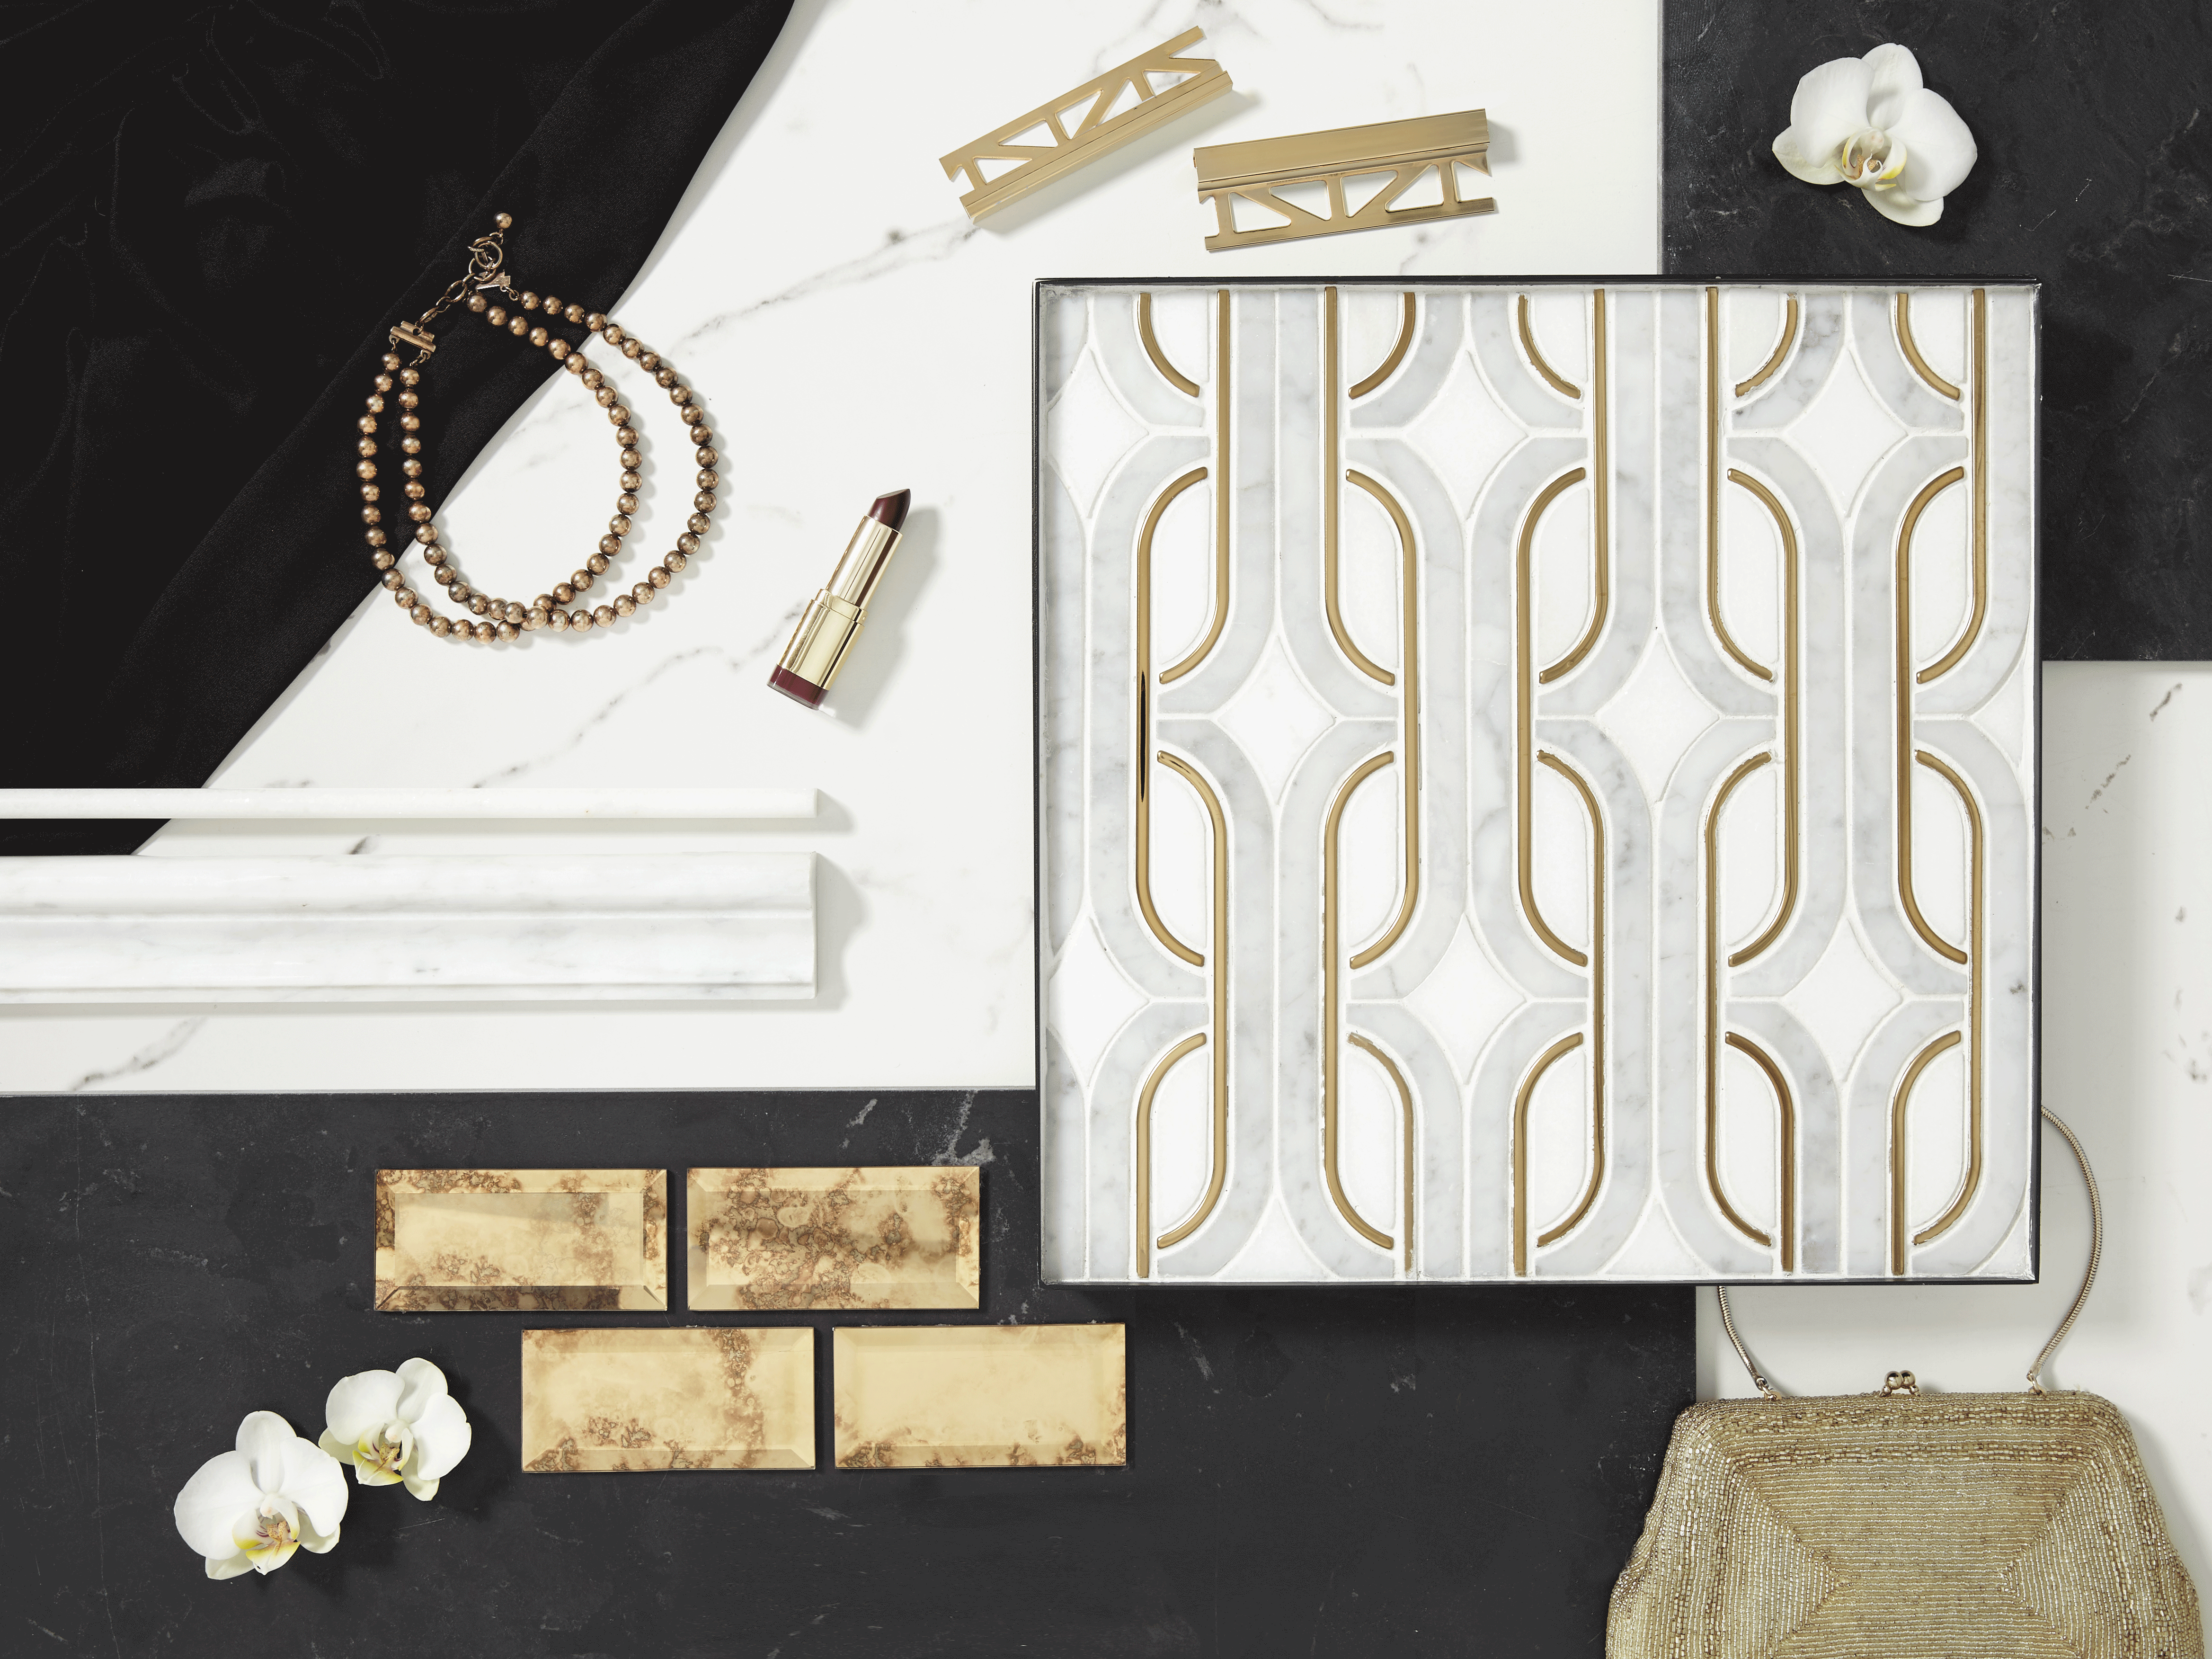 Elements of gilded glamour